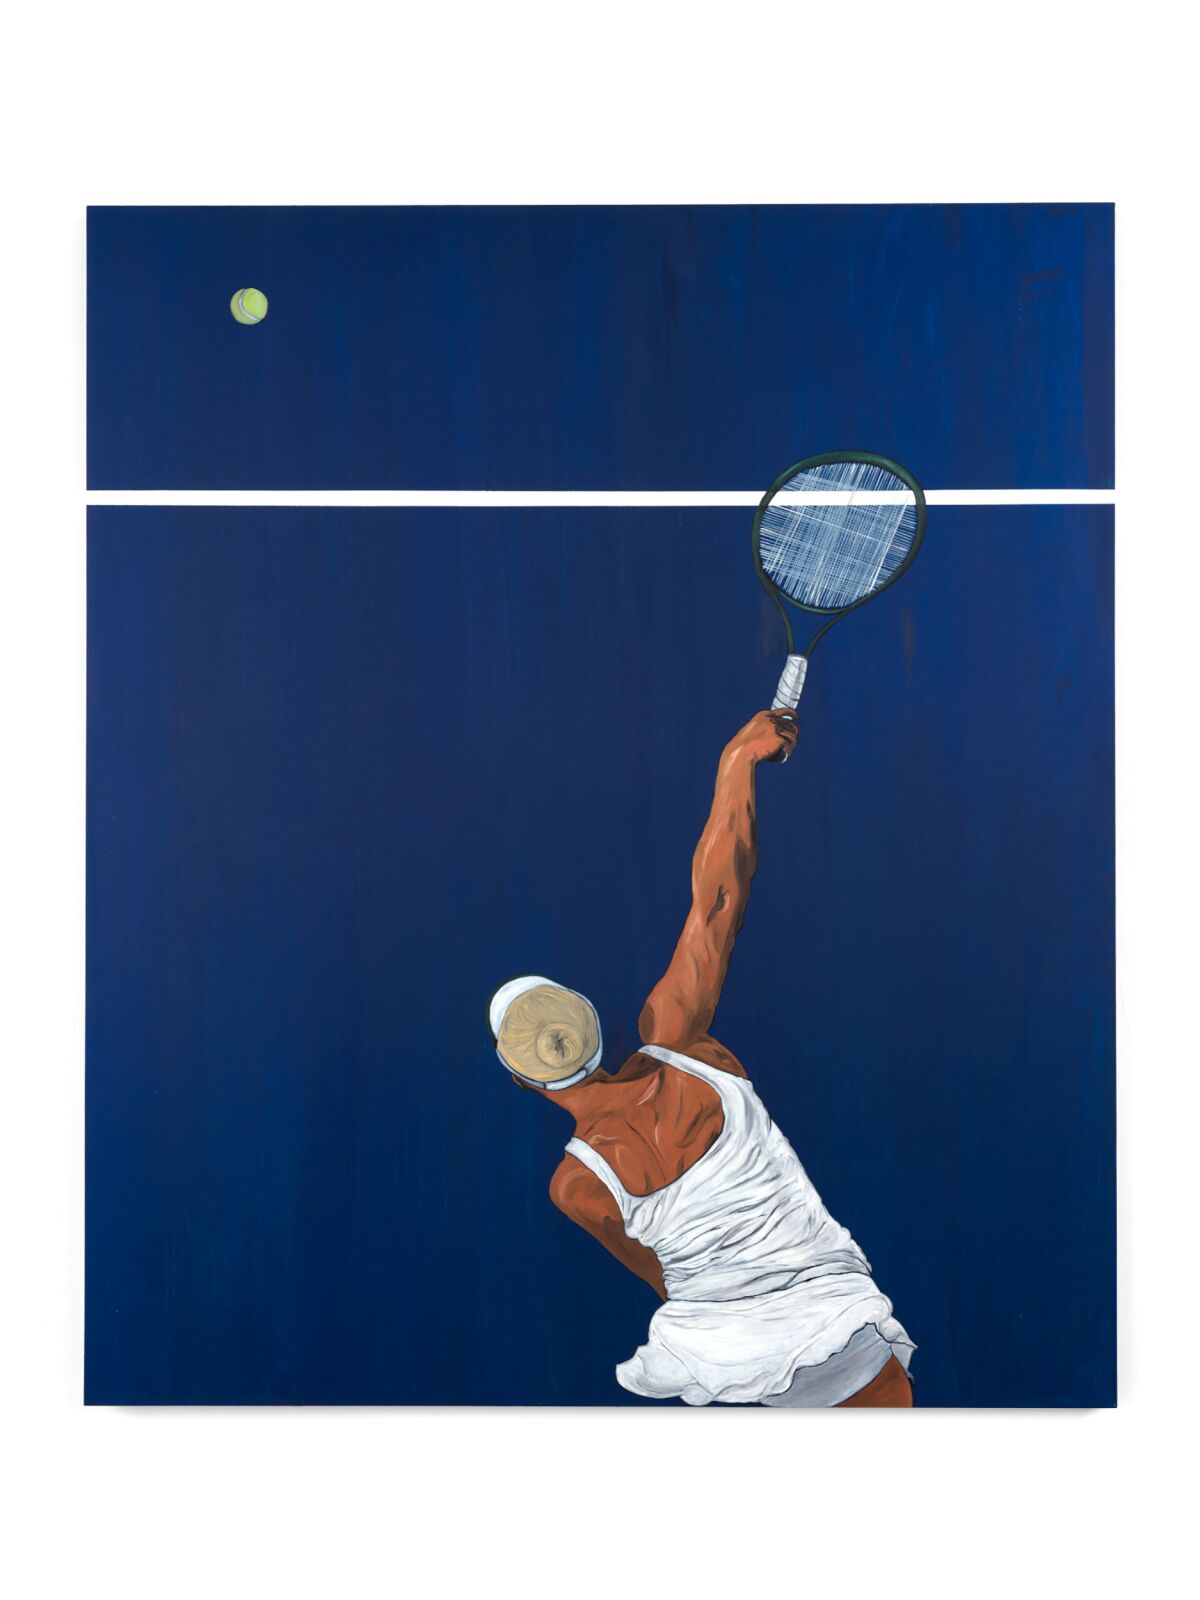 A painting of a person hitting a tennis ball with a racket.